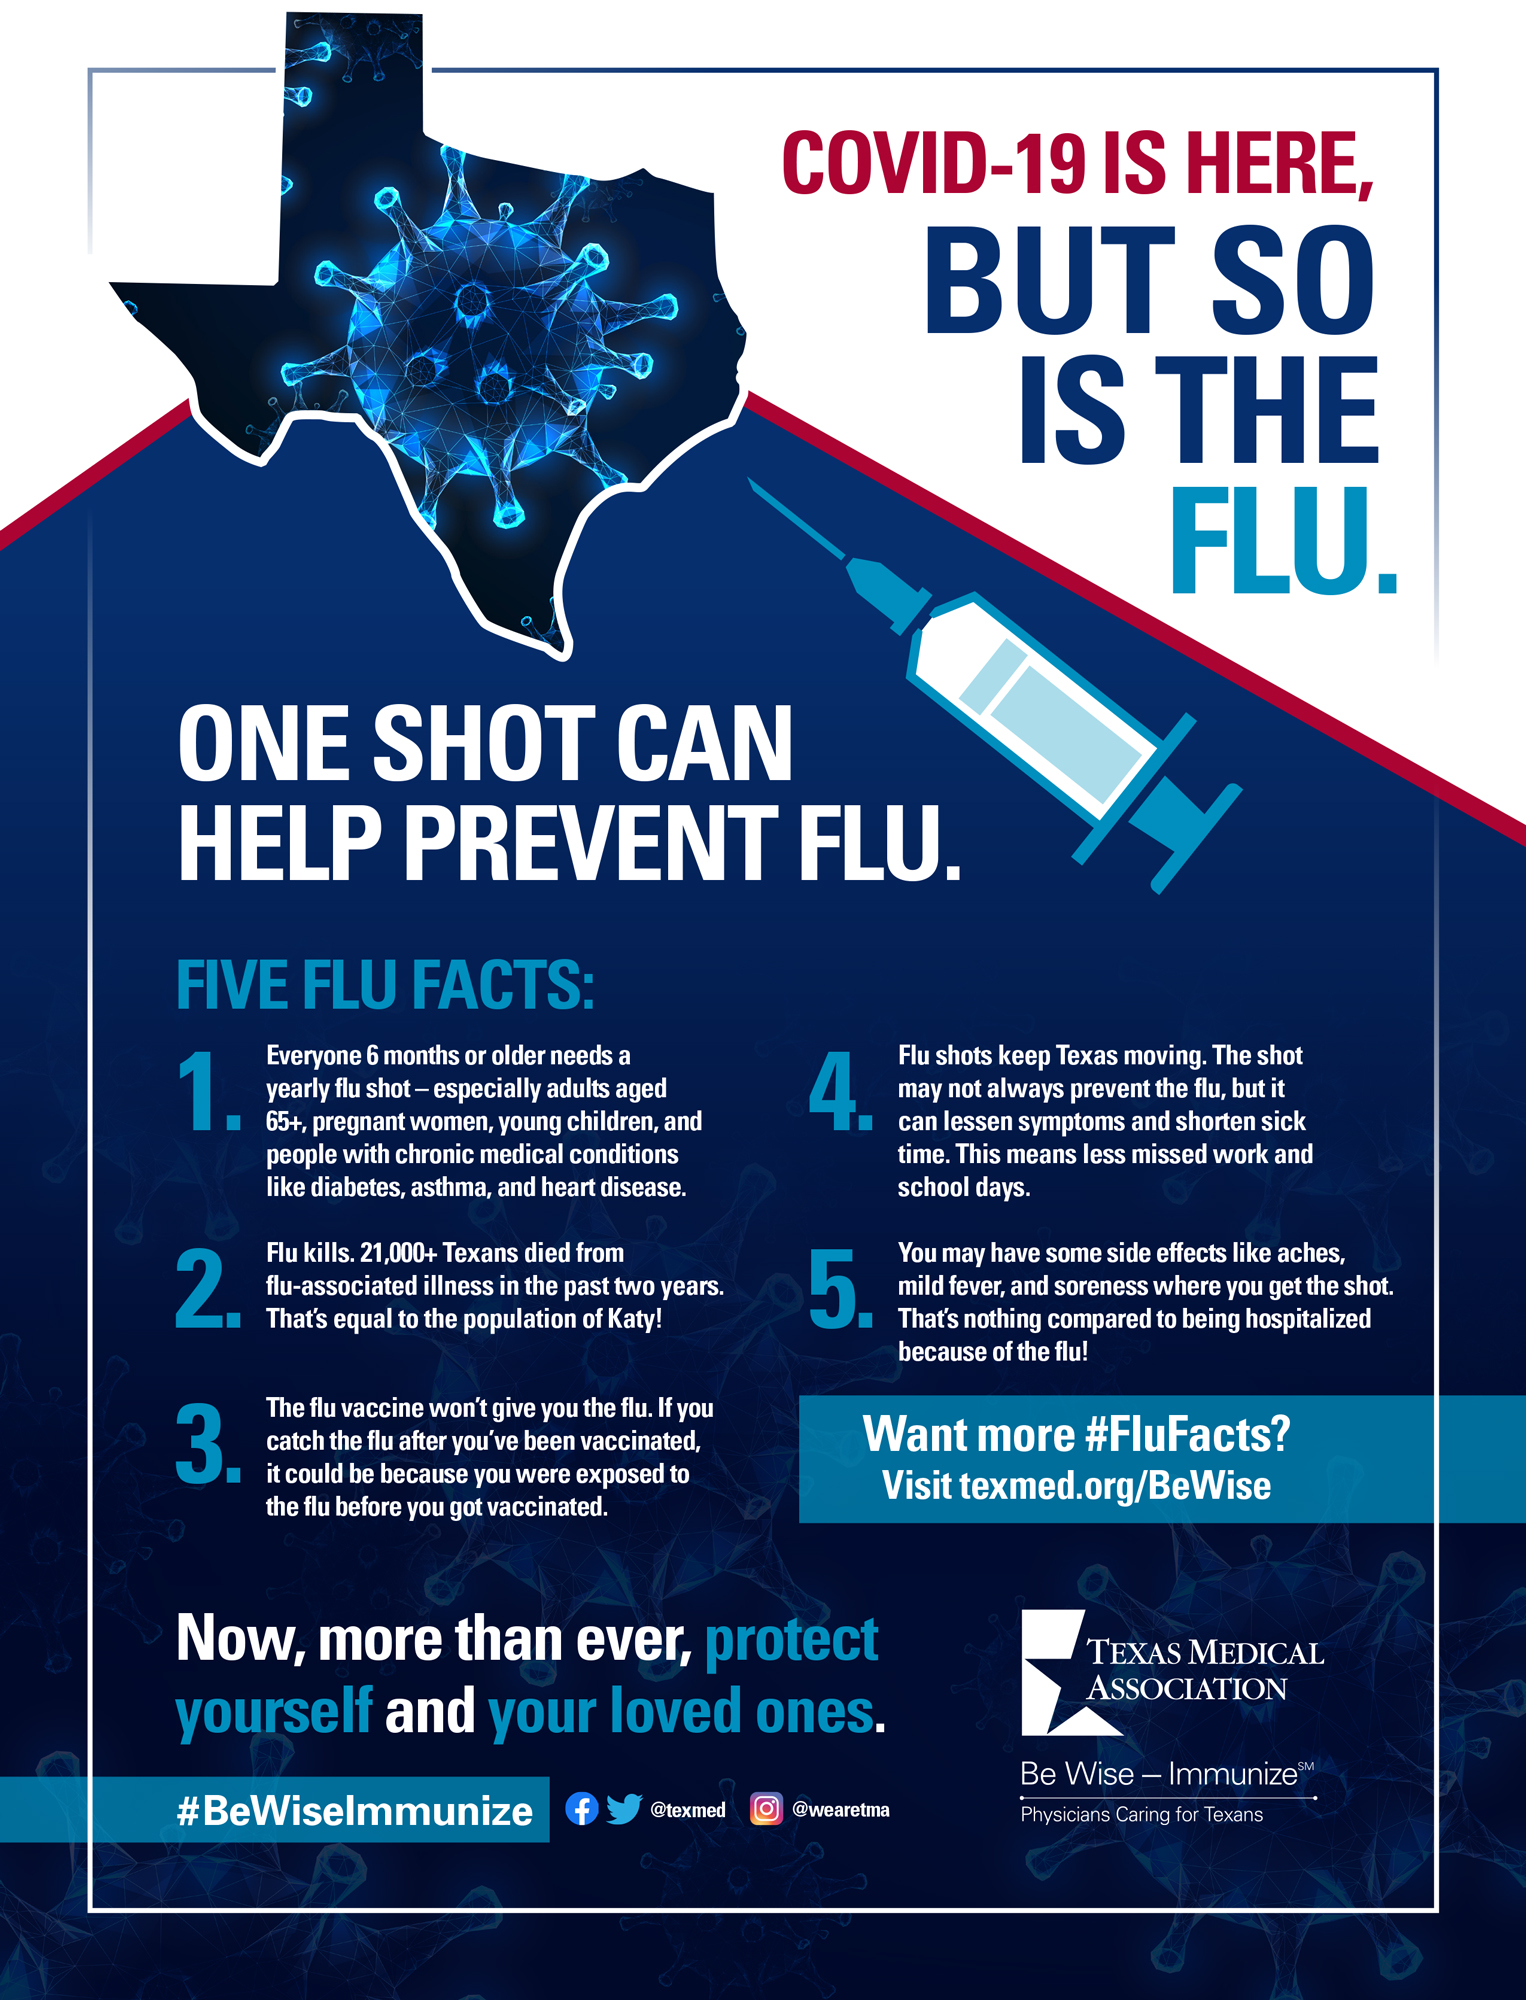 New Poster Encourages Flu Vaccination Amid COVID 19